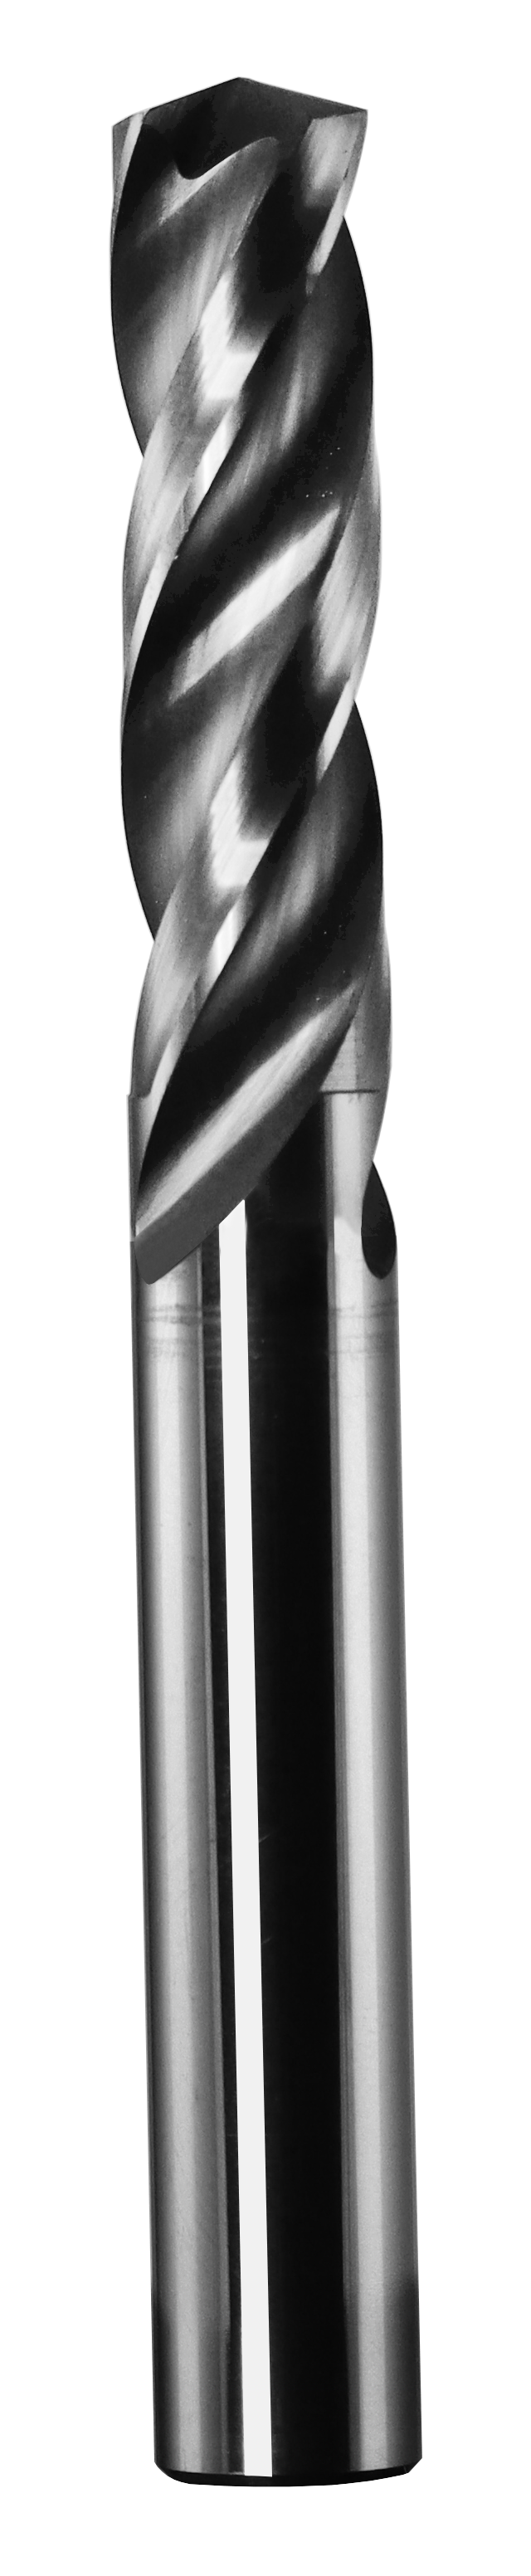 11.00mm Dia, 150 Degree Point, Solid Carbide Drill - 63032